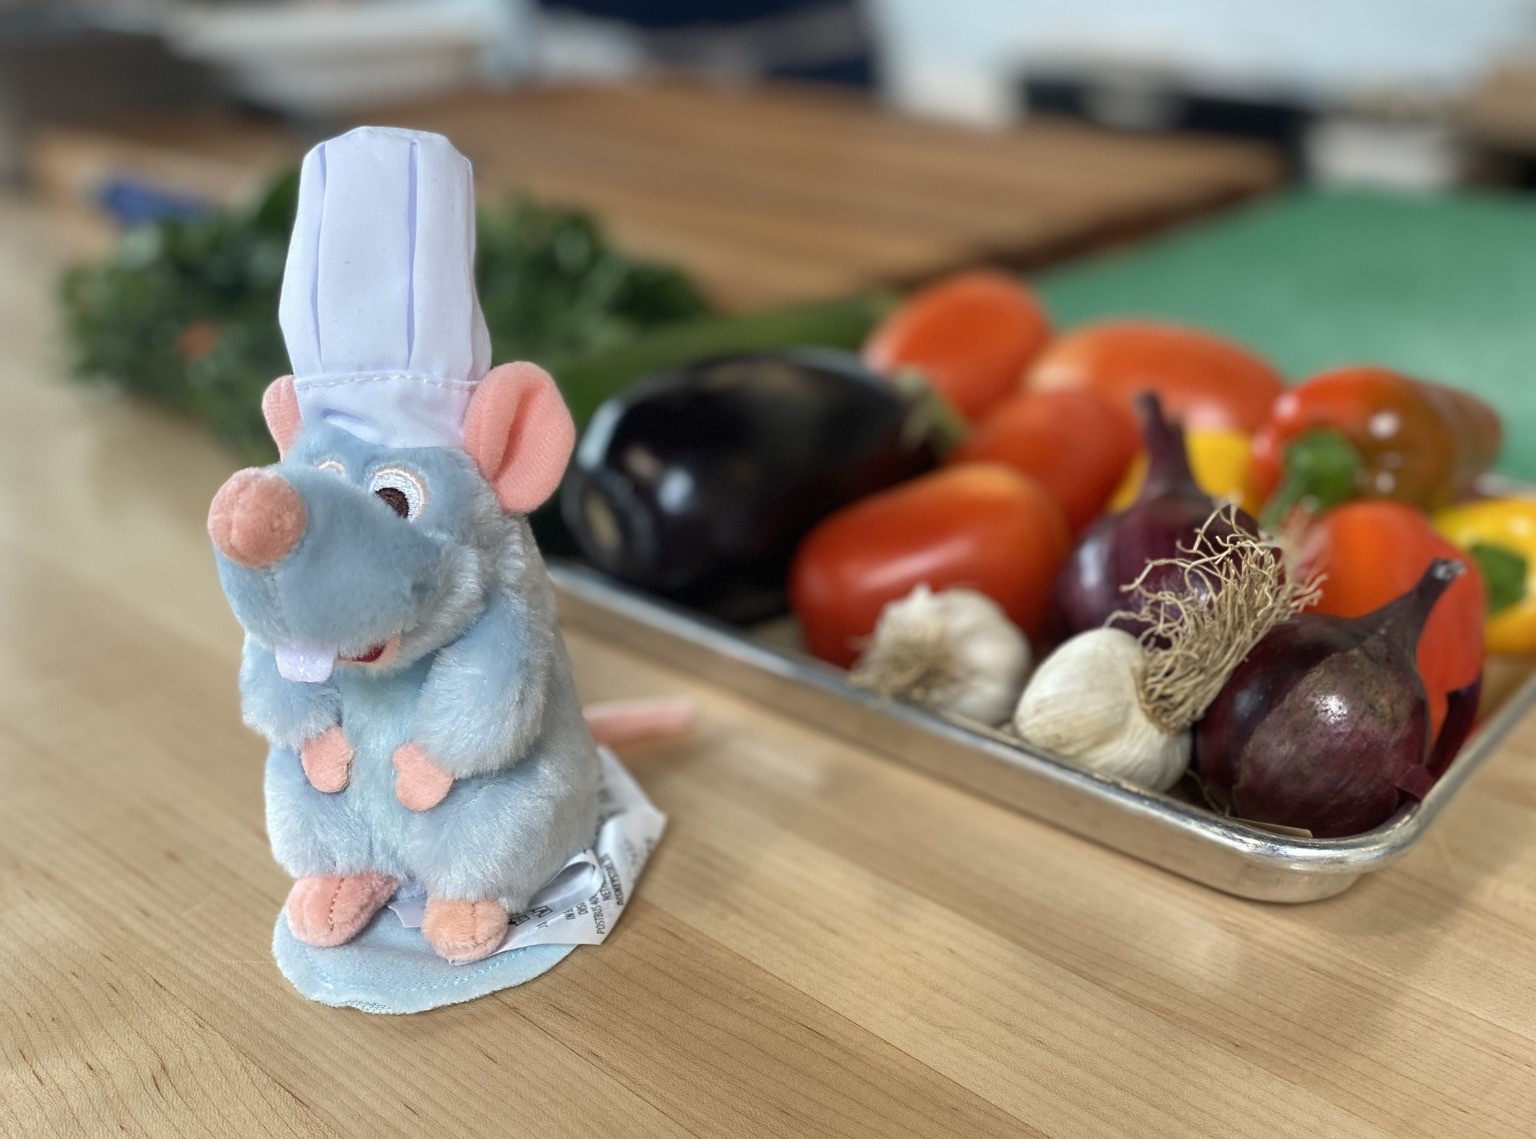 A metal tray of colorful vegetables on a wooden counter. A small stuffed mouse in a chef's hat is in the foreground.